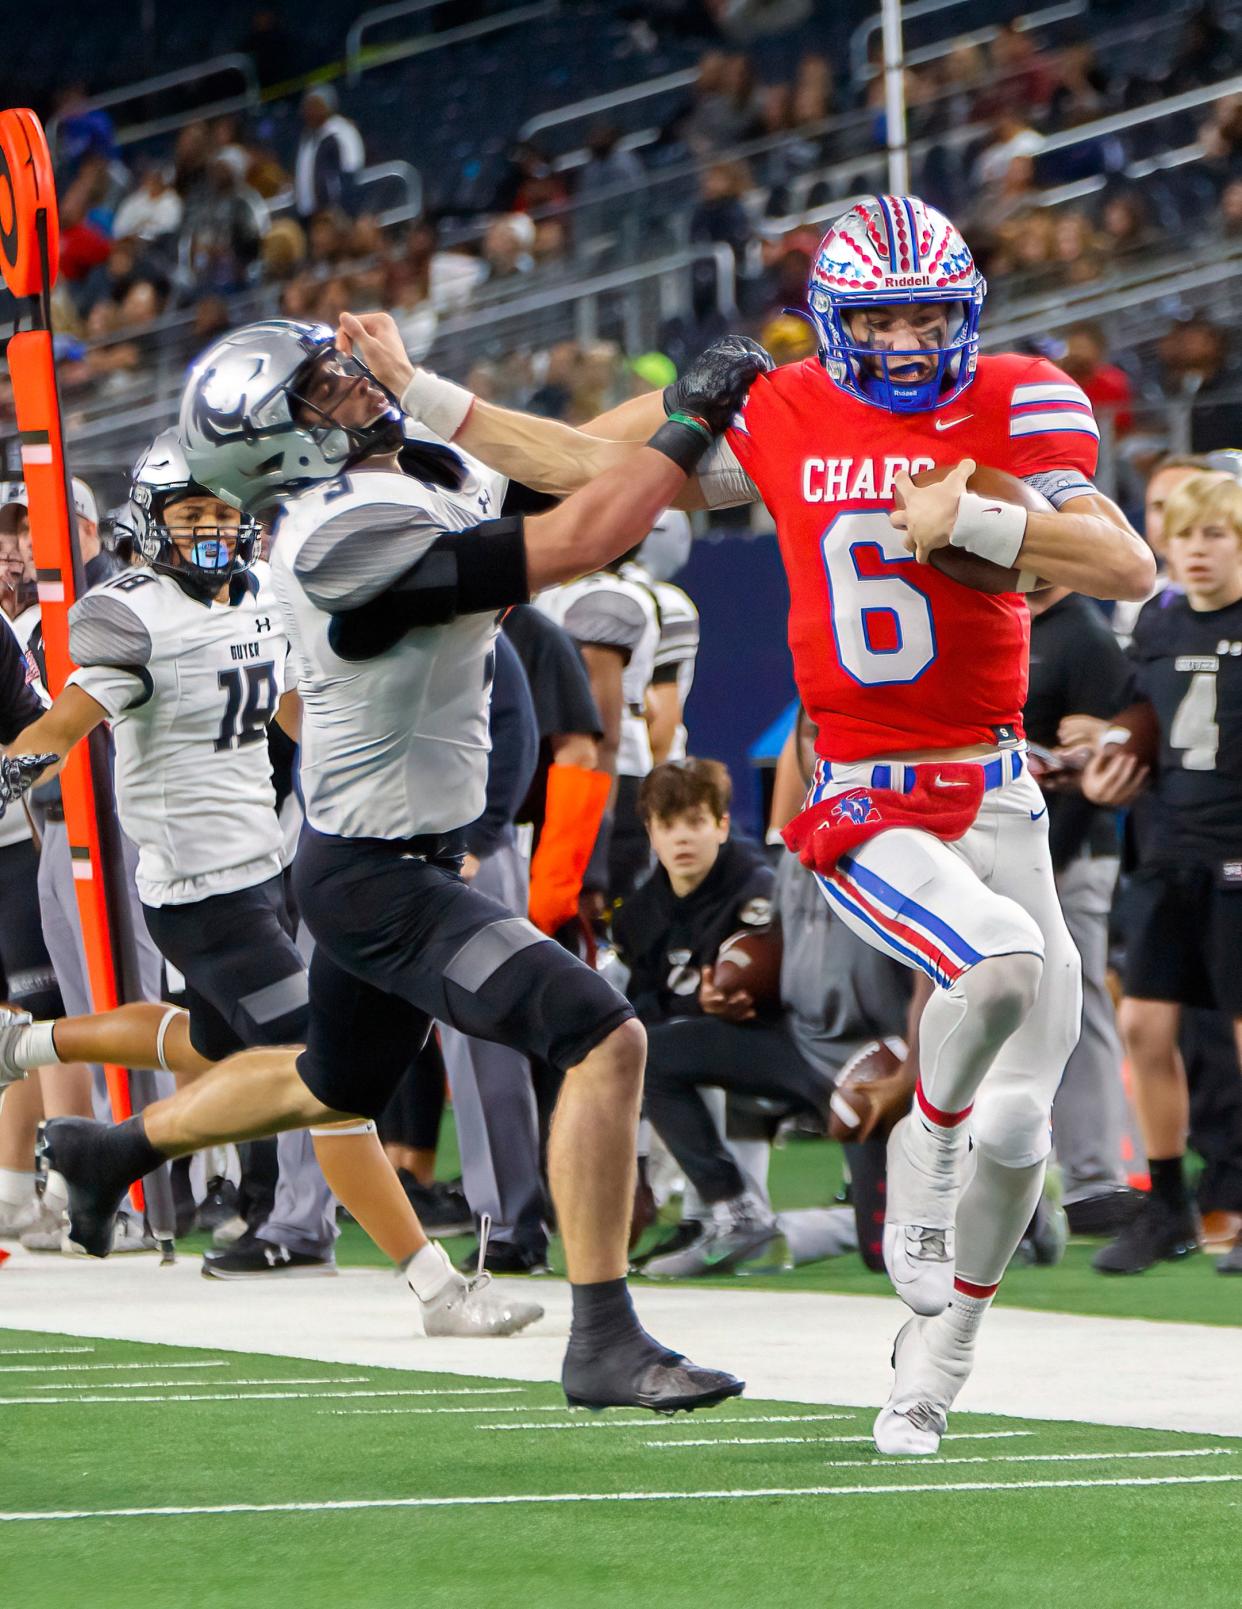 Westlake quarterback Cade Klubnik, right, stiff-arms Denton Guyer safety Jaden Powell during Westlake's win in the Class 6A Division II championship game in December. Klubnik earned the Class 6A’s offensive player of the year award from the Texas Sports Writers Association after throwing for 3,251 yards, 43 touchdowns and only three interceptions.